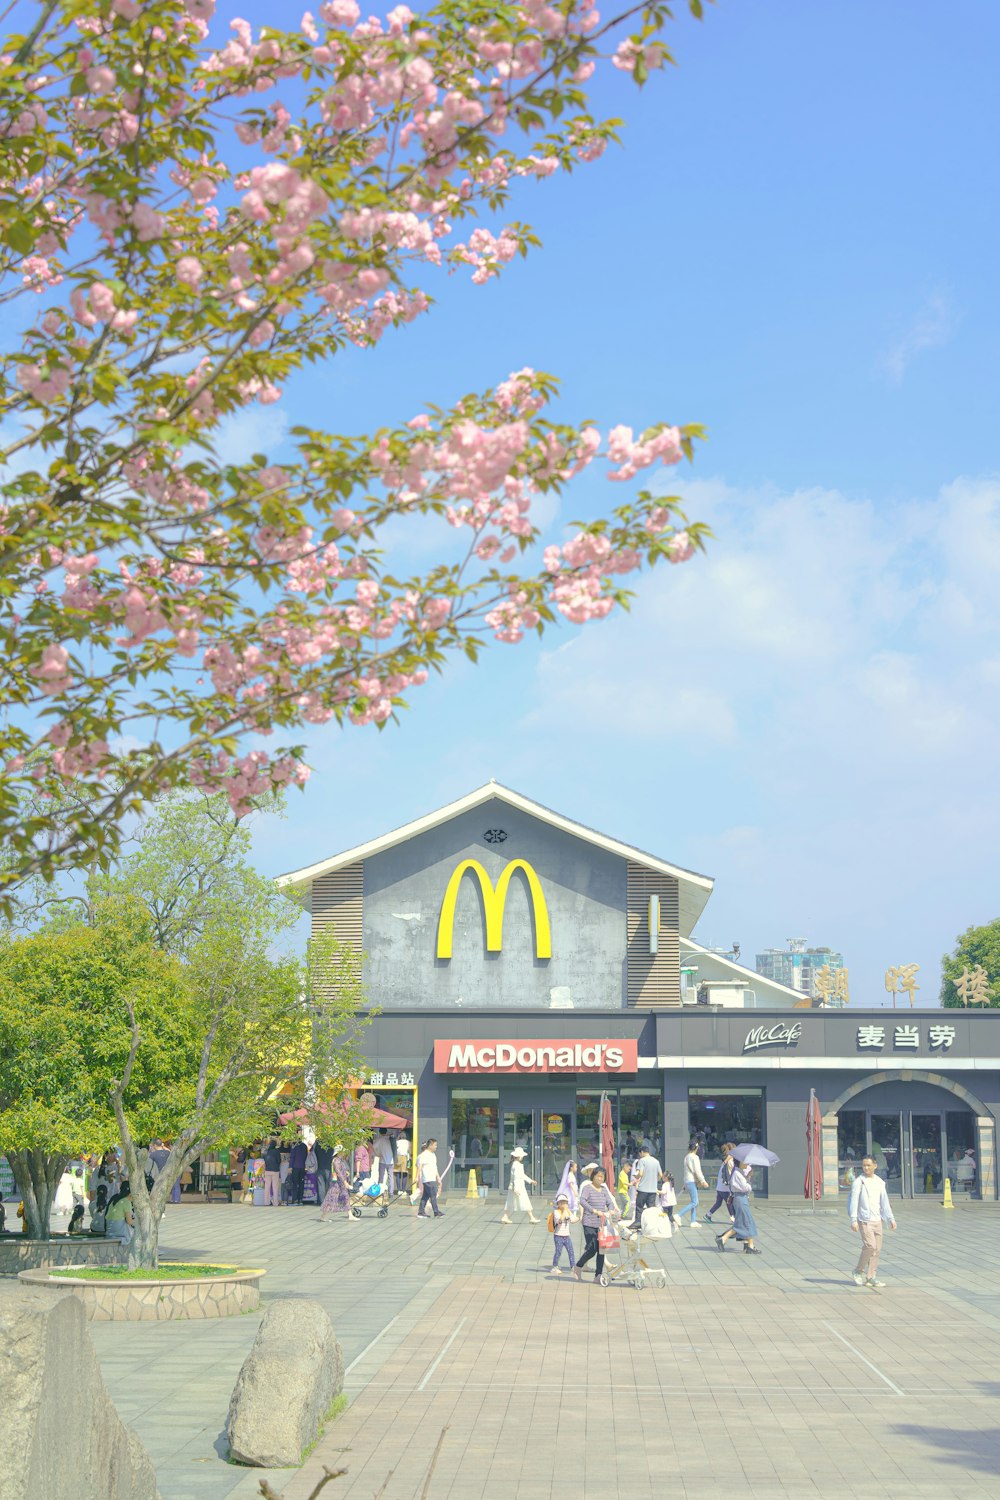 a mcdonald's restaurant with a lot of people walking around